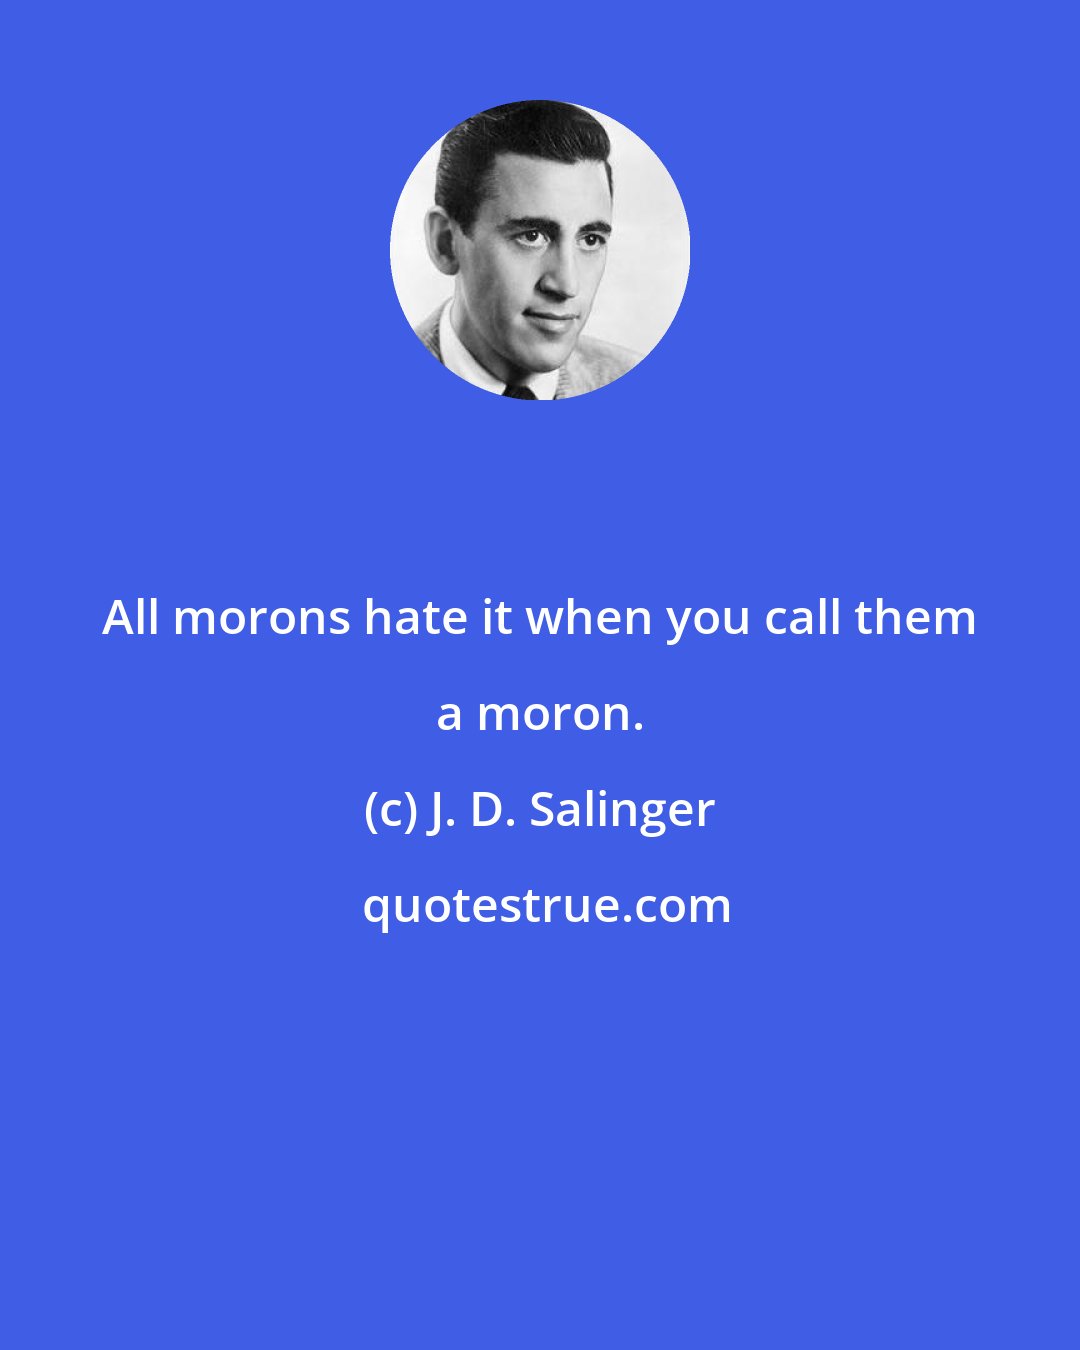 J. D. Salinger: All morons hate it when you call them a moron.